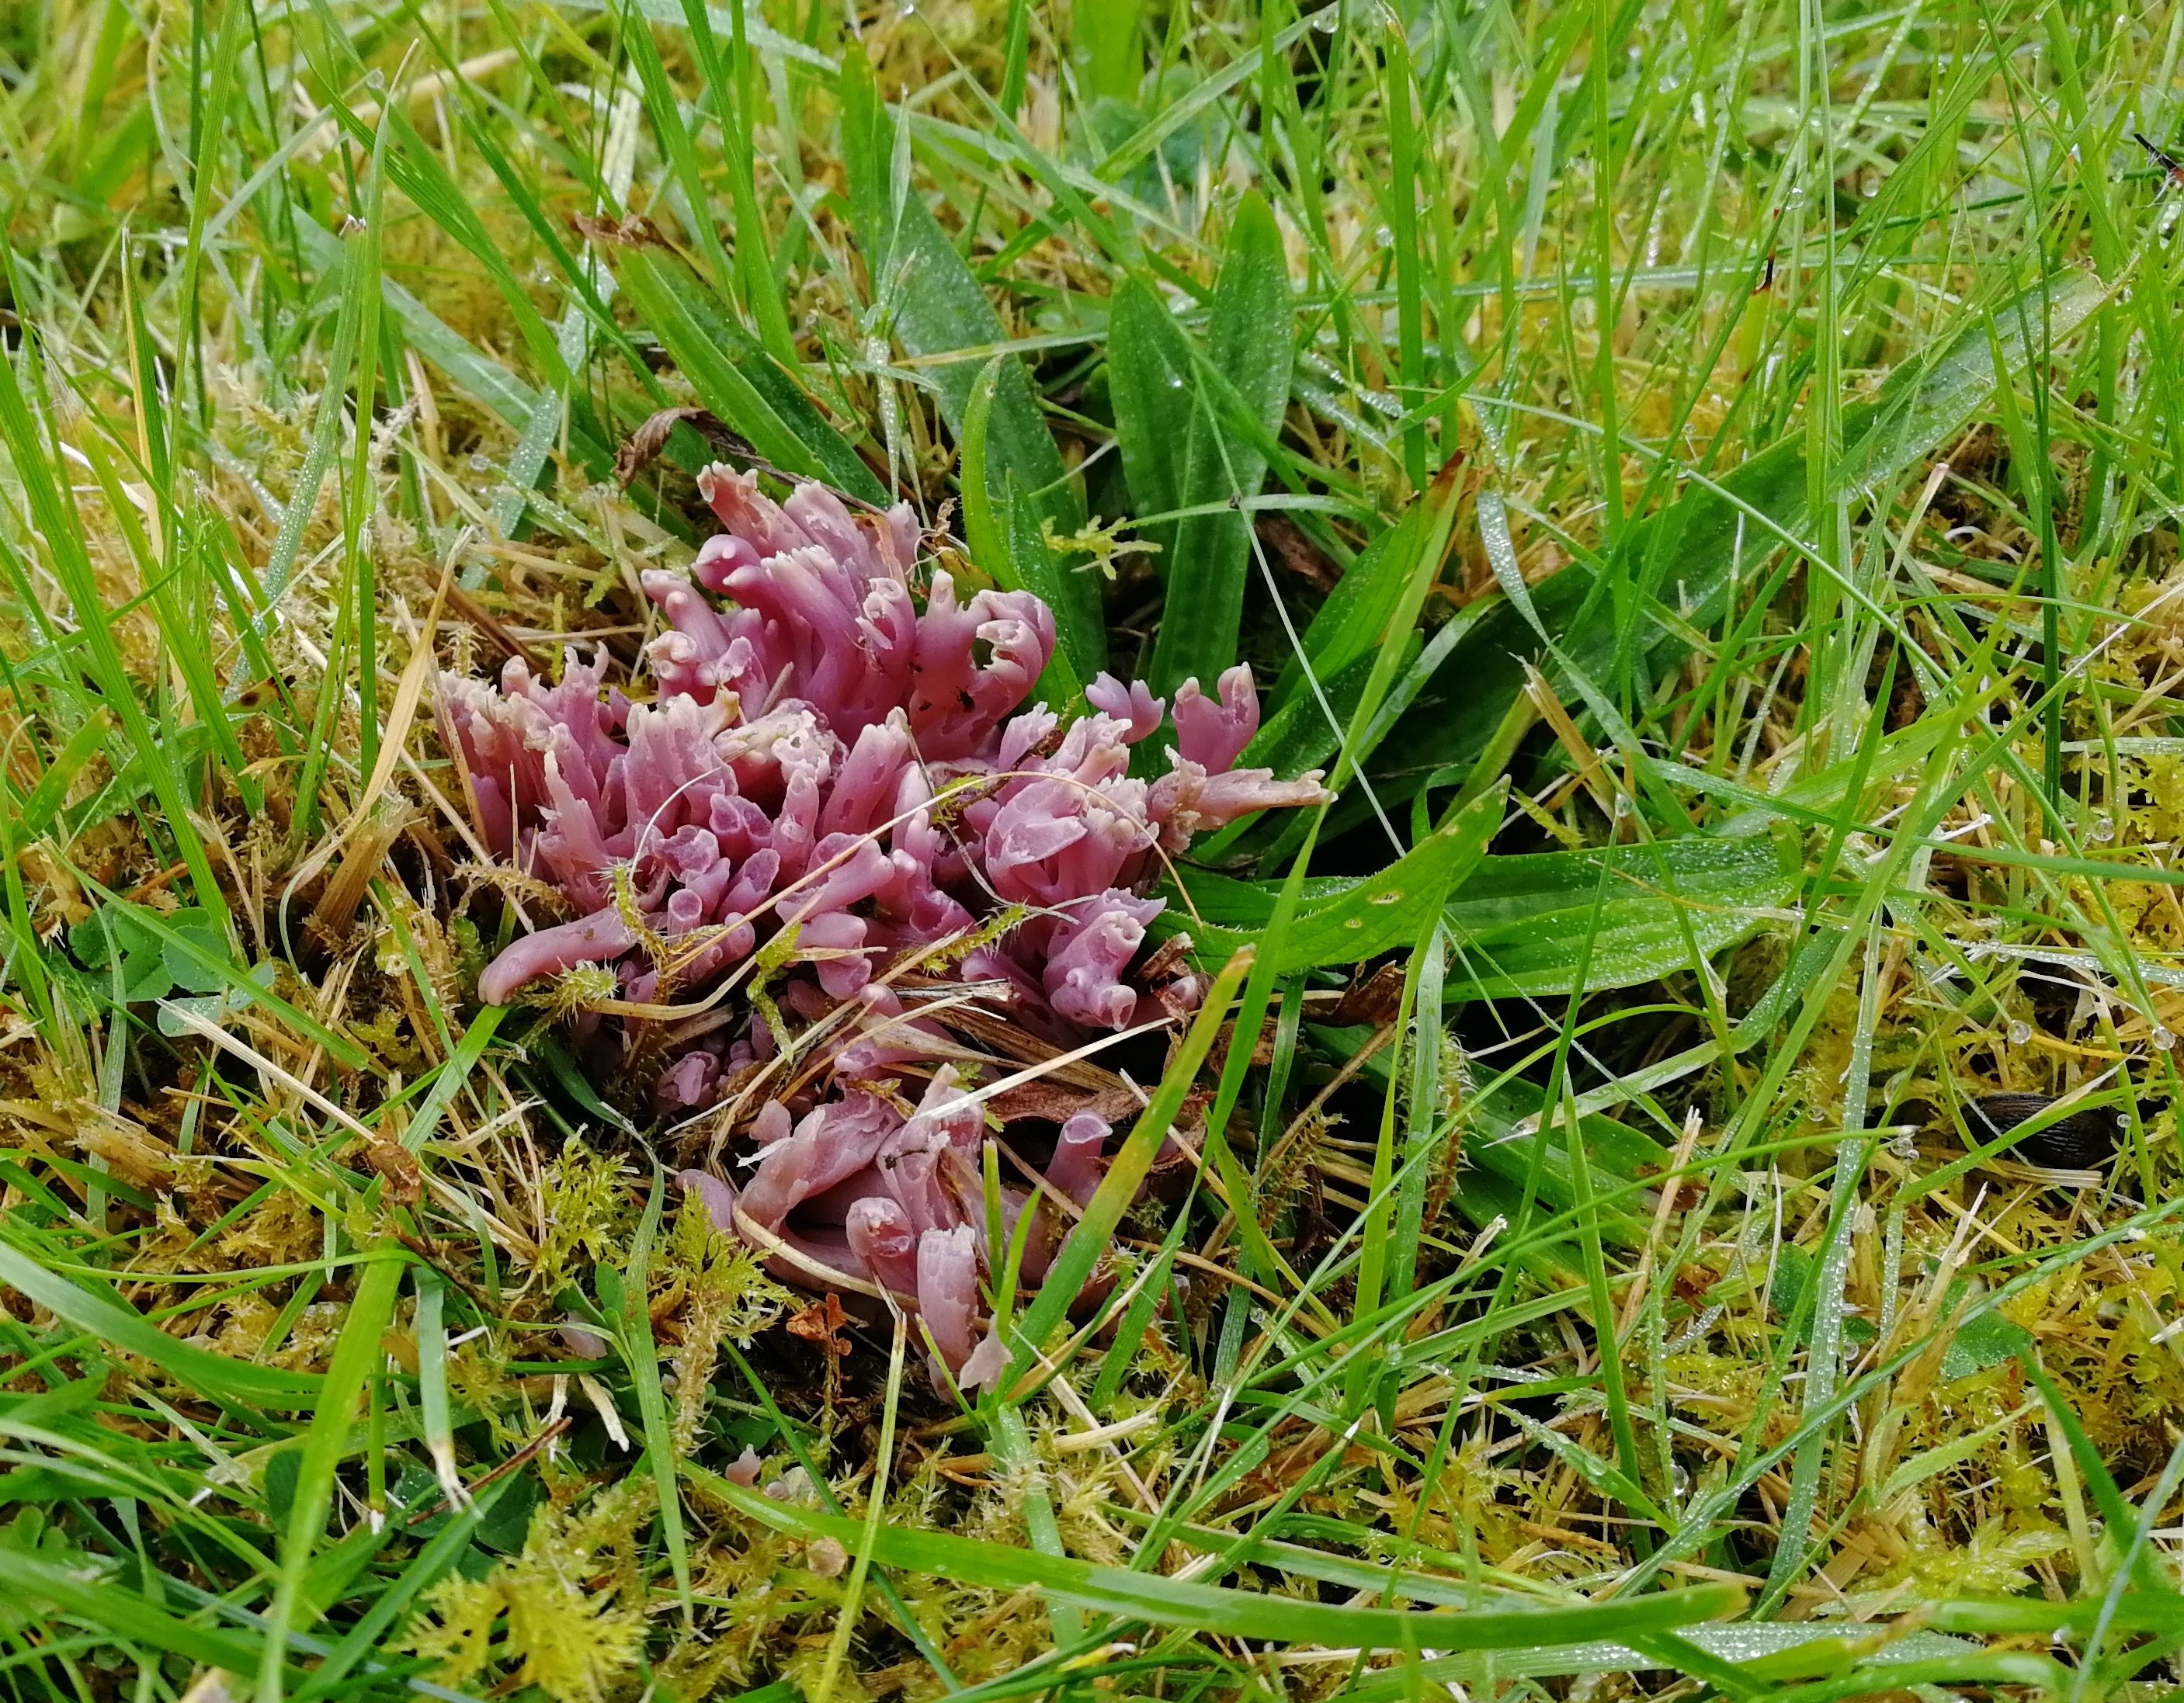 The colourful Violet Coral fungus was found on grasslands at two Munros. (Plantlife/PA)